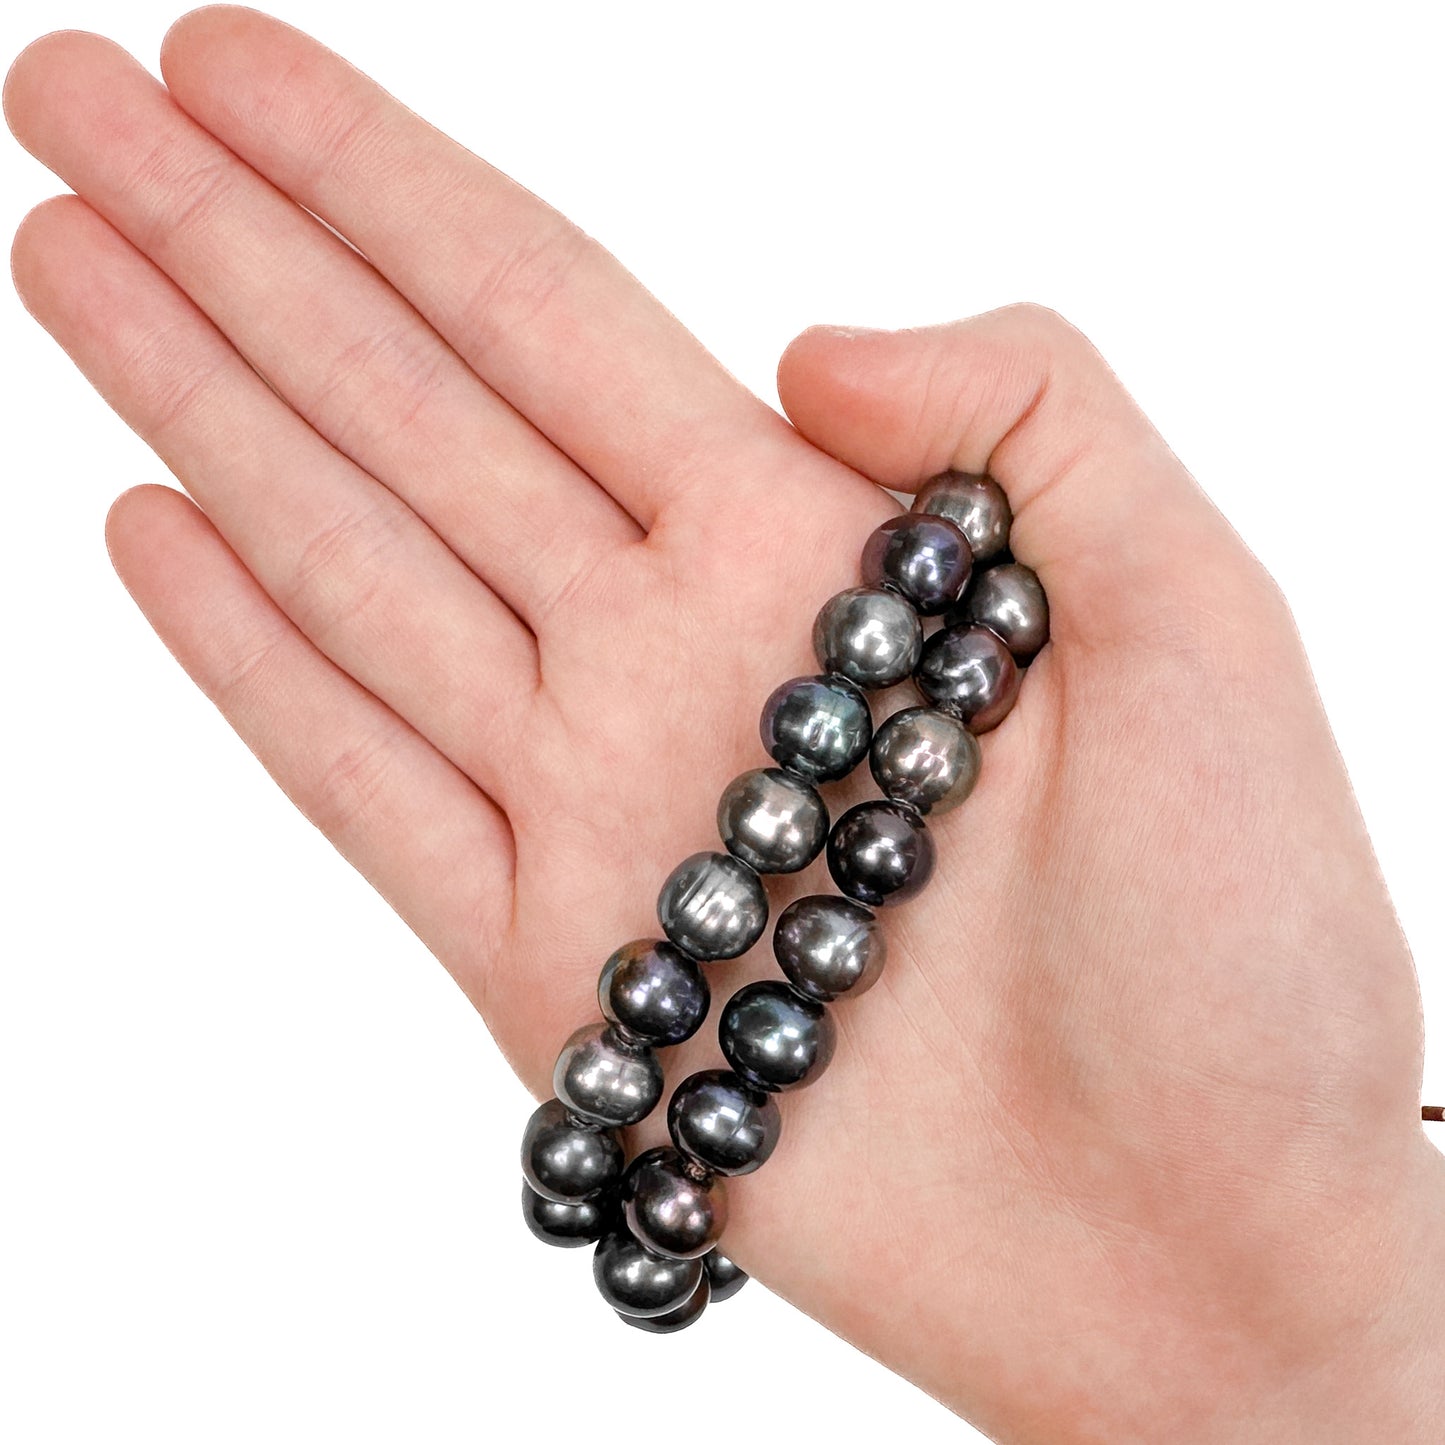 *Medium Peacock 10mm Potato with Large Hole Freshwater Pearl Bead (3 Quantities Available)-The Bead Gallery Honolulu